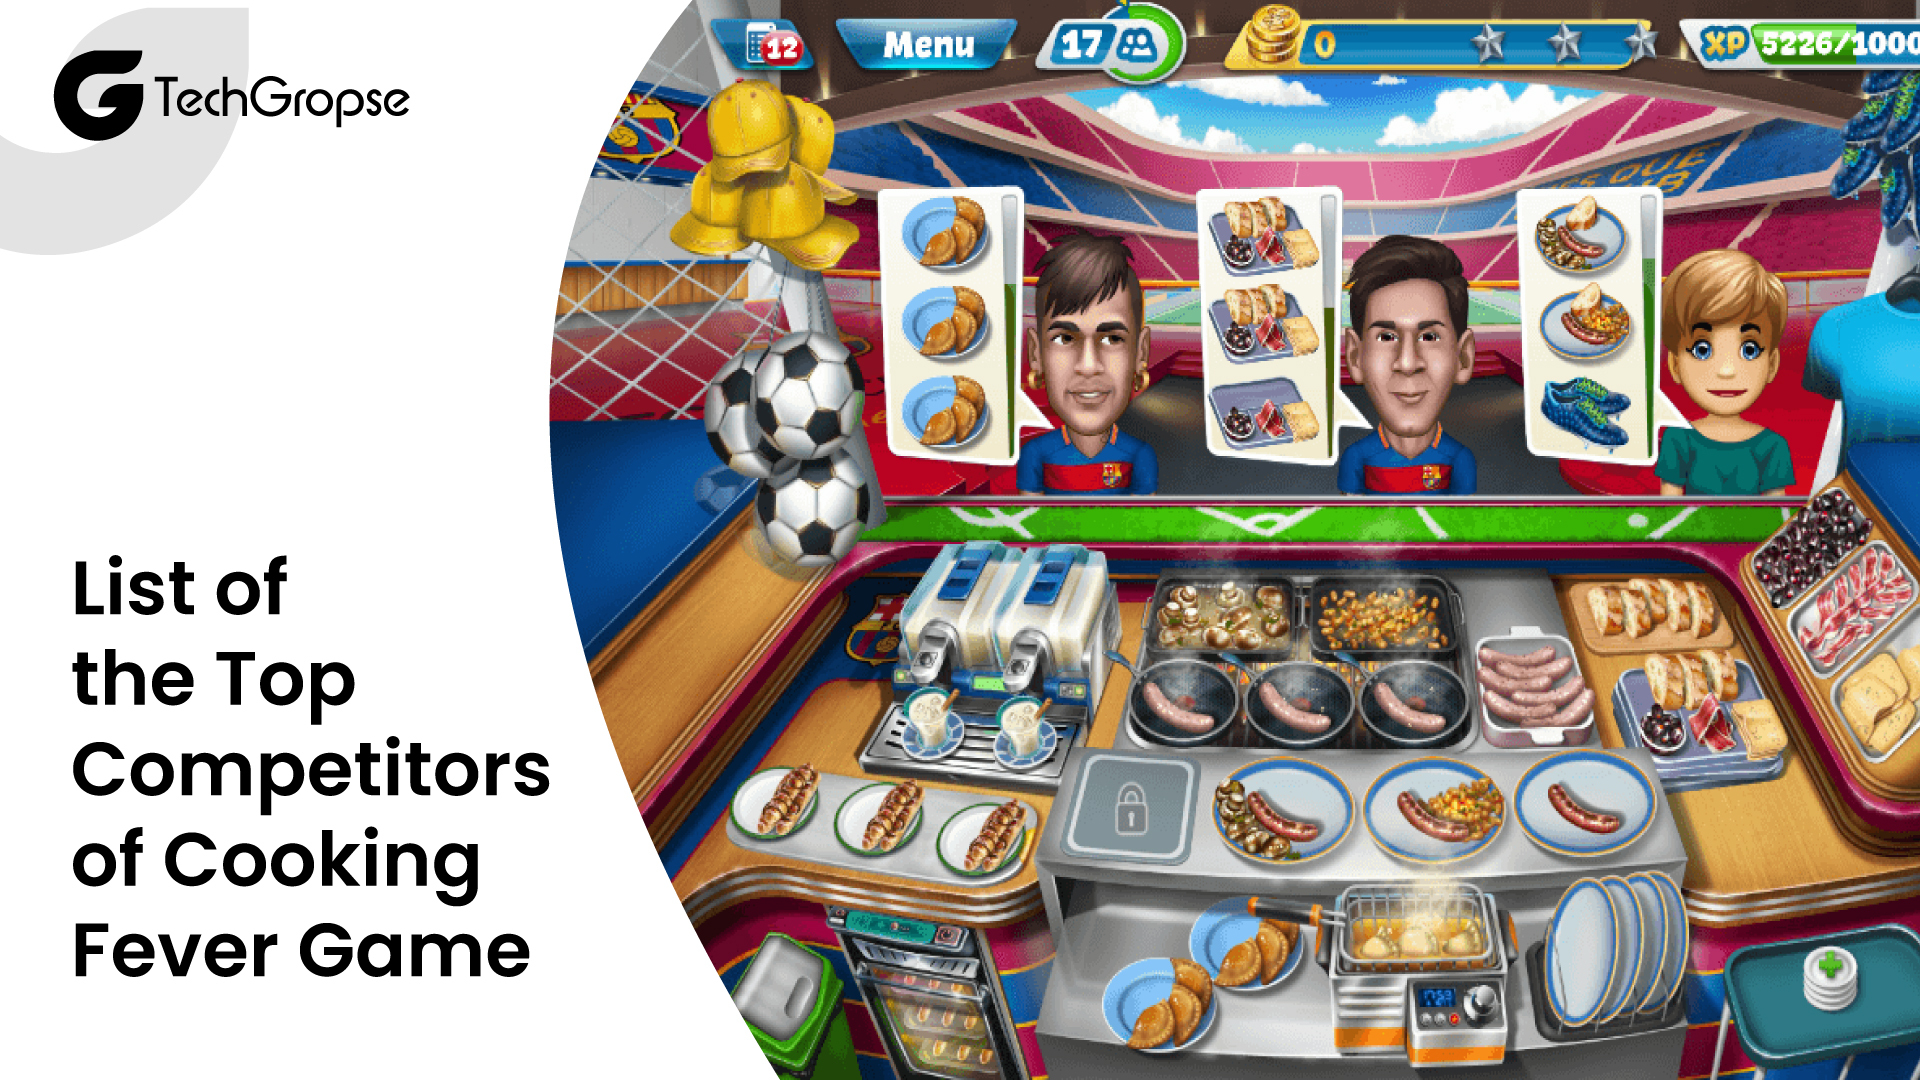 List of the Top Competitors of Cooking Fever Game